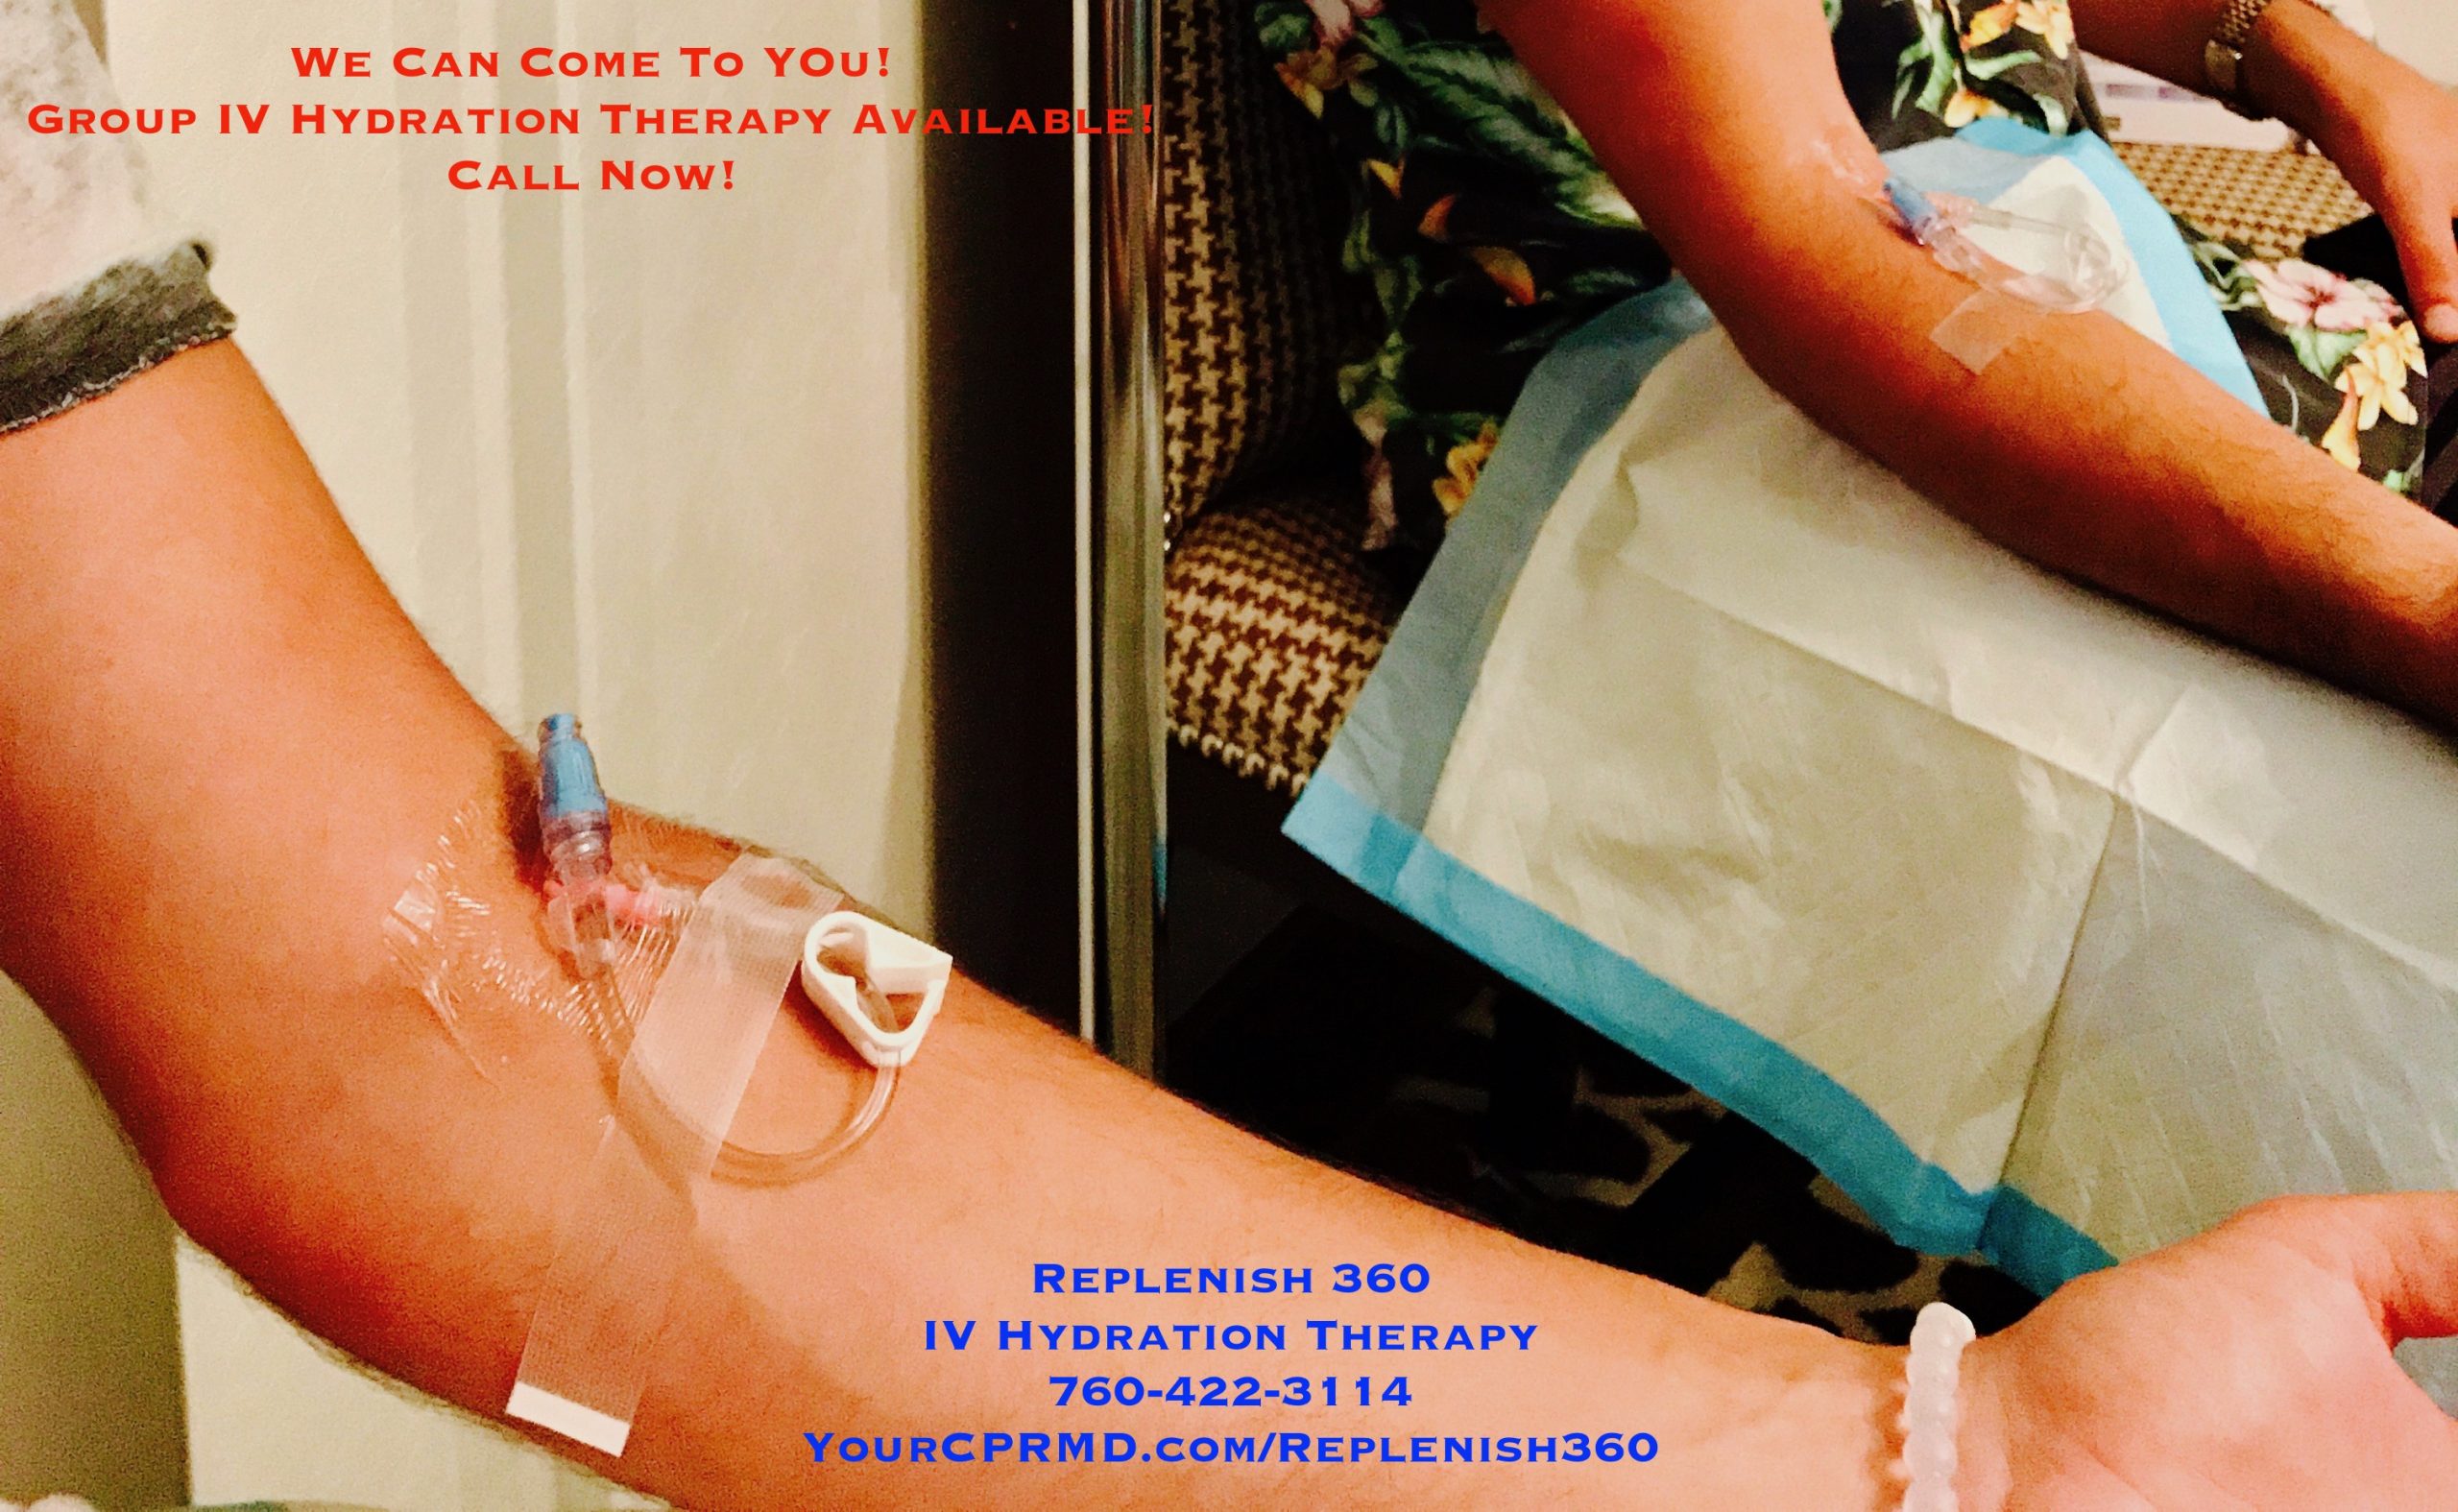 You are currently viewing Replenish 360’s iv hydration therapy & wellness services